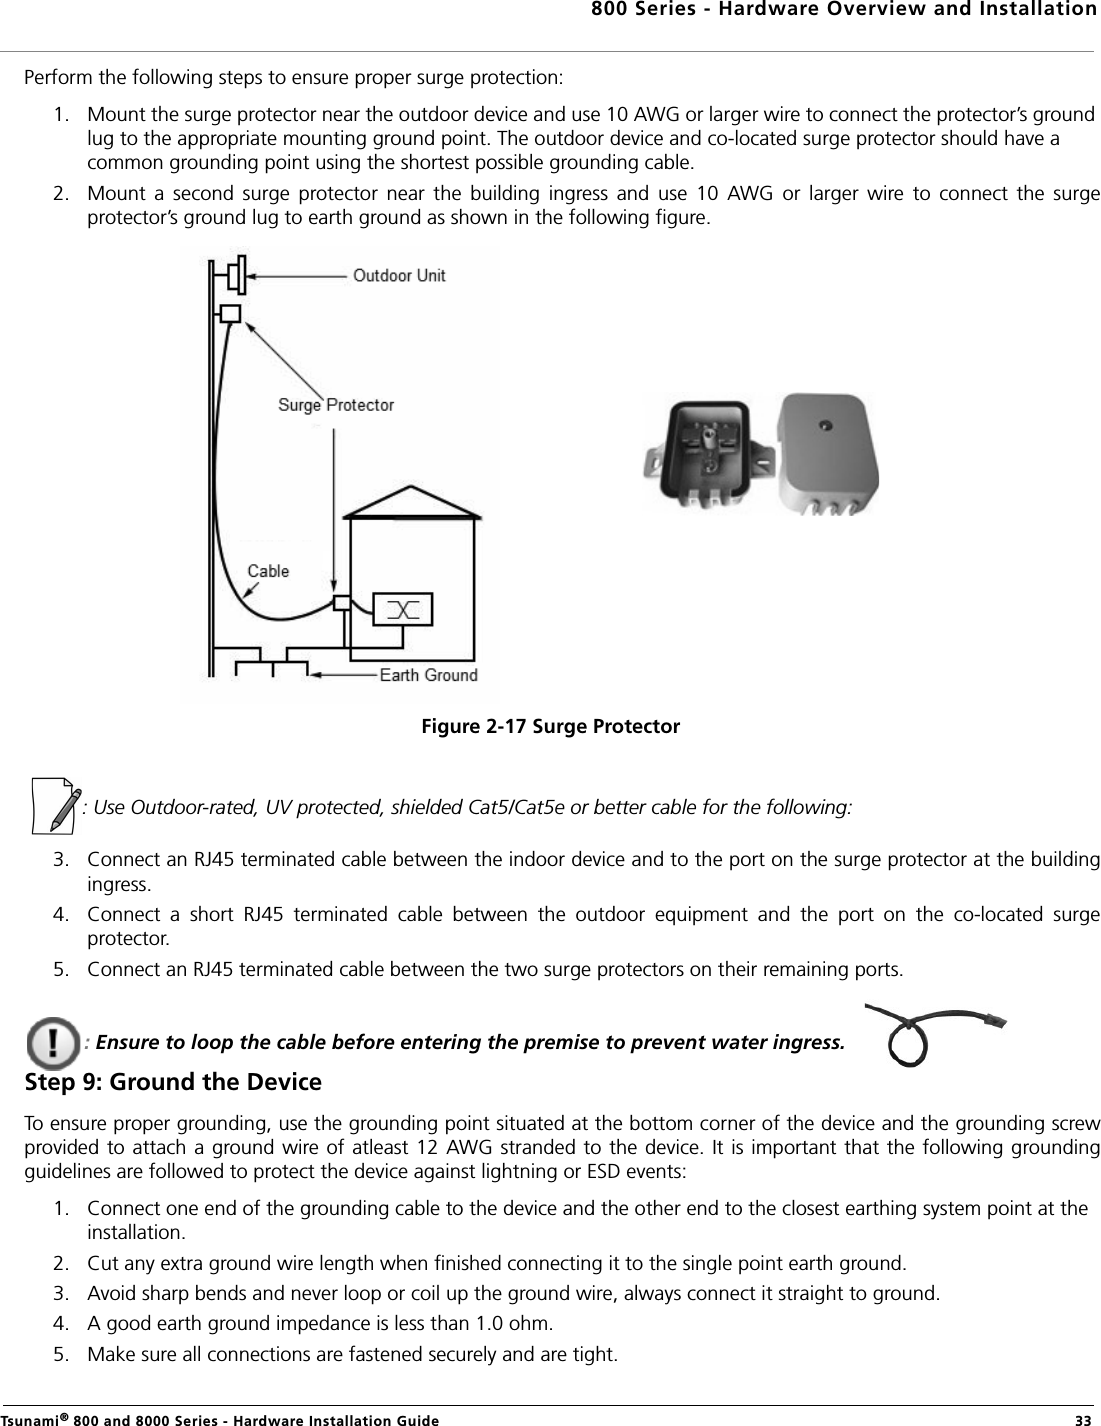 800 Series - Hardware Overview and InstallationTsunami® 800 and 8000 Series - Hardware Installation Guide  33Perform the following steps to ensure proper surge protection:1. Mount the surge protector near the outdoor device and use 10 AWG or larger wire to connect the protector’s ground lug to the appropriate mounting ground point. The outdoor device and co-located surge protector should have a common grounding point using the shortest possible grounding cable.2. Mount  a  second  surge  protector  near  the  building  ingress  and  use  10  AWG  or  larger  wire  to  connect  the  surgeprotector’s ground lug to earth ground as shown in the following figure.Figure 2-17 Surge Protector  : Use Outdoor-rated, UV protected, shielded Cat5/Cat5e or better cable for the following:3. Connect an RJ45 terminated cable between the indoor device and to the port on the surge protector at the buildingingress. 4. Connect  a  short  RJ45  terminated  cable  between  the  outdoor  equipment  and  the  port  on  the  co-located  surgeprotector.5. Connect an RJ45 terminated cable between the two surge protectors on their remaining ports.: Ensure to loop the cable before entering the premise to prevent water ingress.Step 9: Ground the DeviceTo ensure proper grounding, use the grounding point situated at the bottom corner of the device and the grounding screwprovided to attach  a ground wire of atleast  12 AWG stranded to  the device. It is important that the following  groundingguidelines are followed to protect the device against lightning or ESD events:1. Connect one end of the grounding cable to the device and the other end to the closest earthing system point at the installation.2. Cut any extra ground wire length when finished connecting it to the single point earth ground. 3. Avoid sharp bends and never loop or coil up the ground wire, always connect it straight to ground.4. A good earth ground impedance is less than 1.0 ohm. 5. Make sure all connections are fastened securely and are tight. 